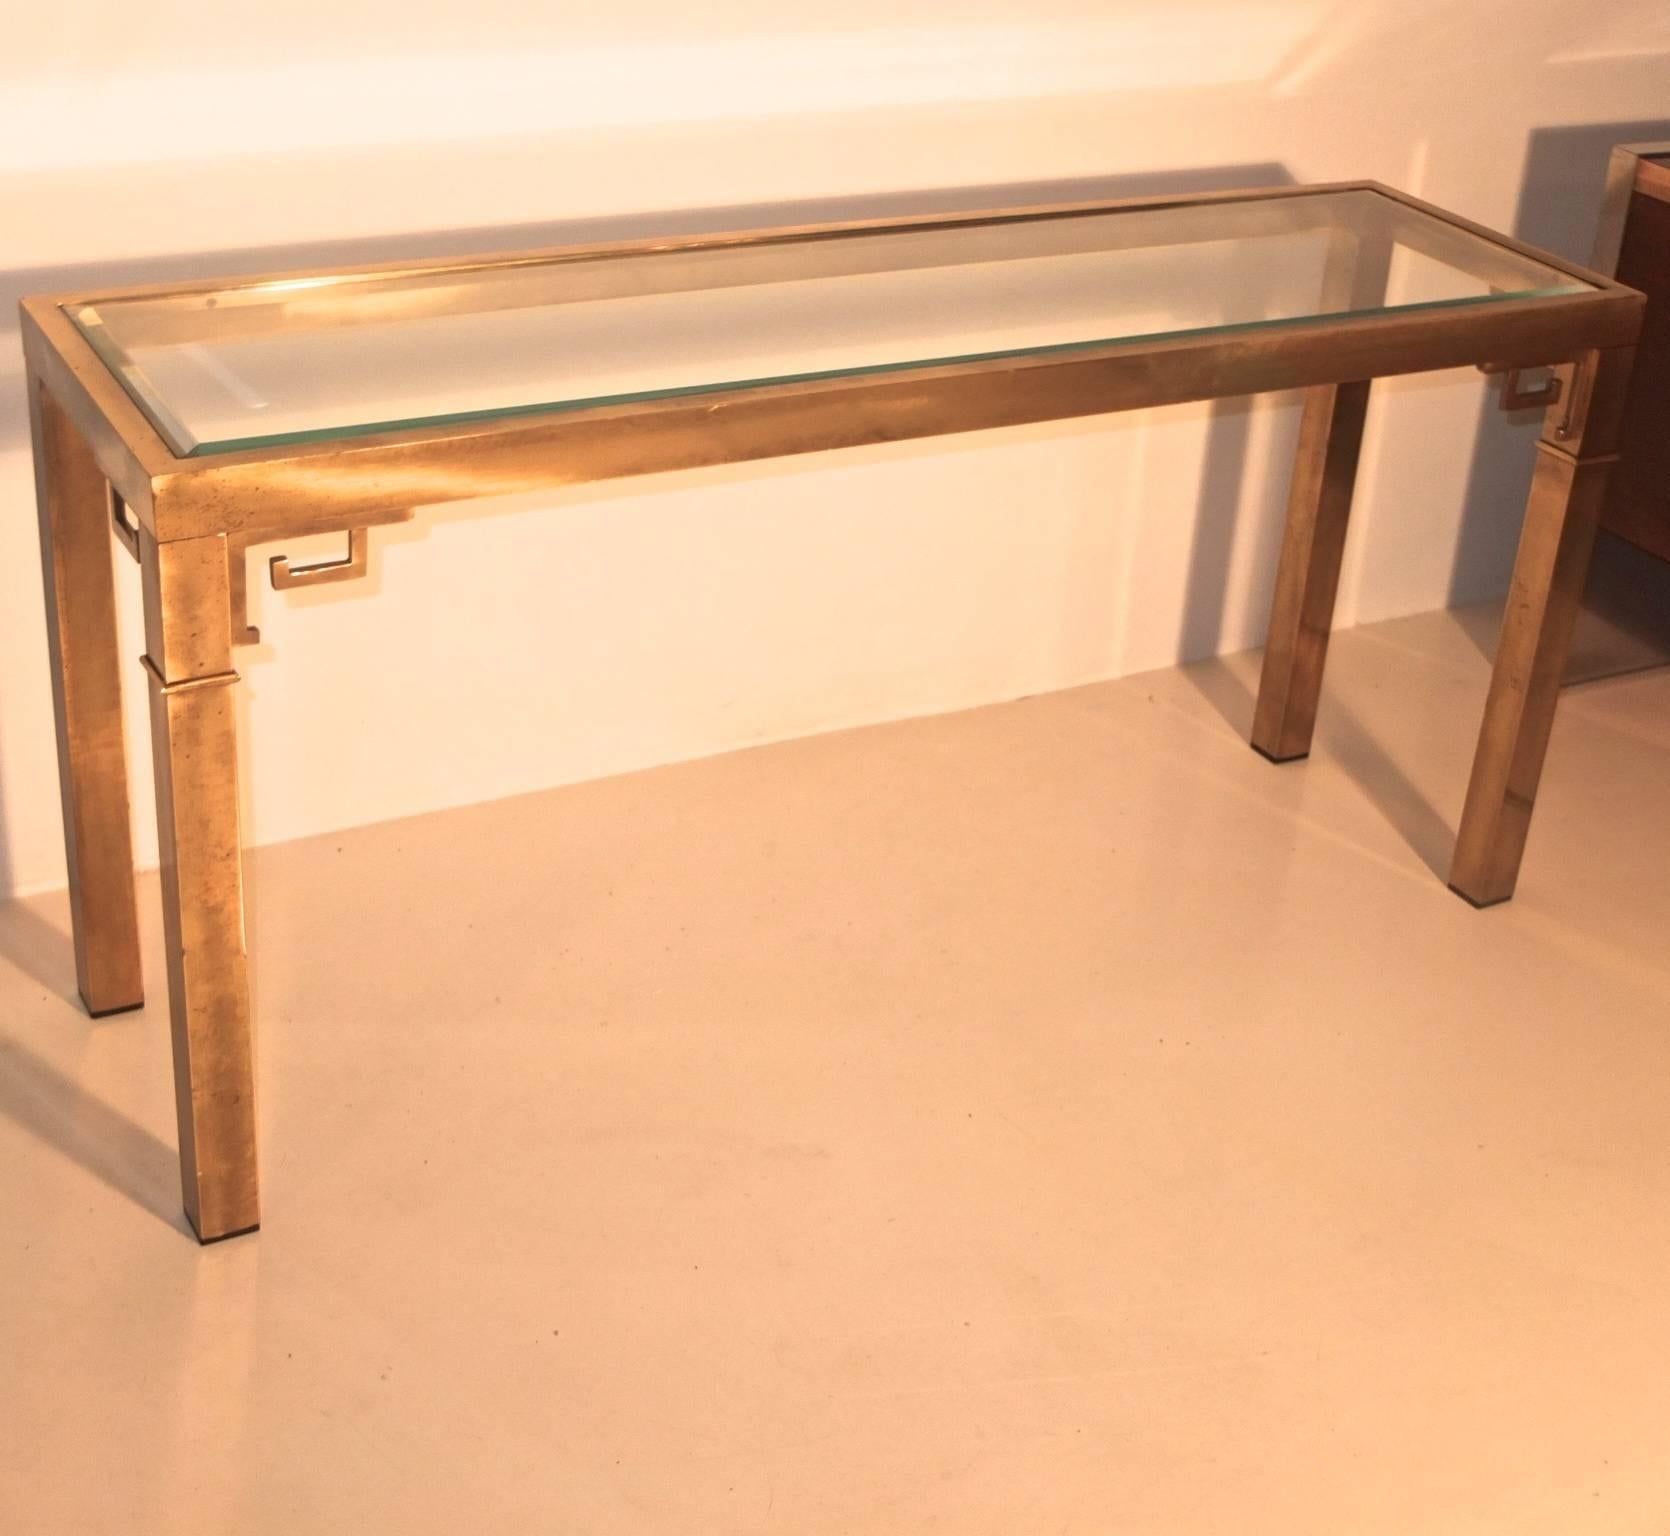 Parsons form rectangular console sofa table by Mastercraft in solid brass with a clear beveled inset flush glass top and subtle greek key ornamentations.  

